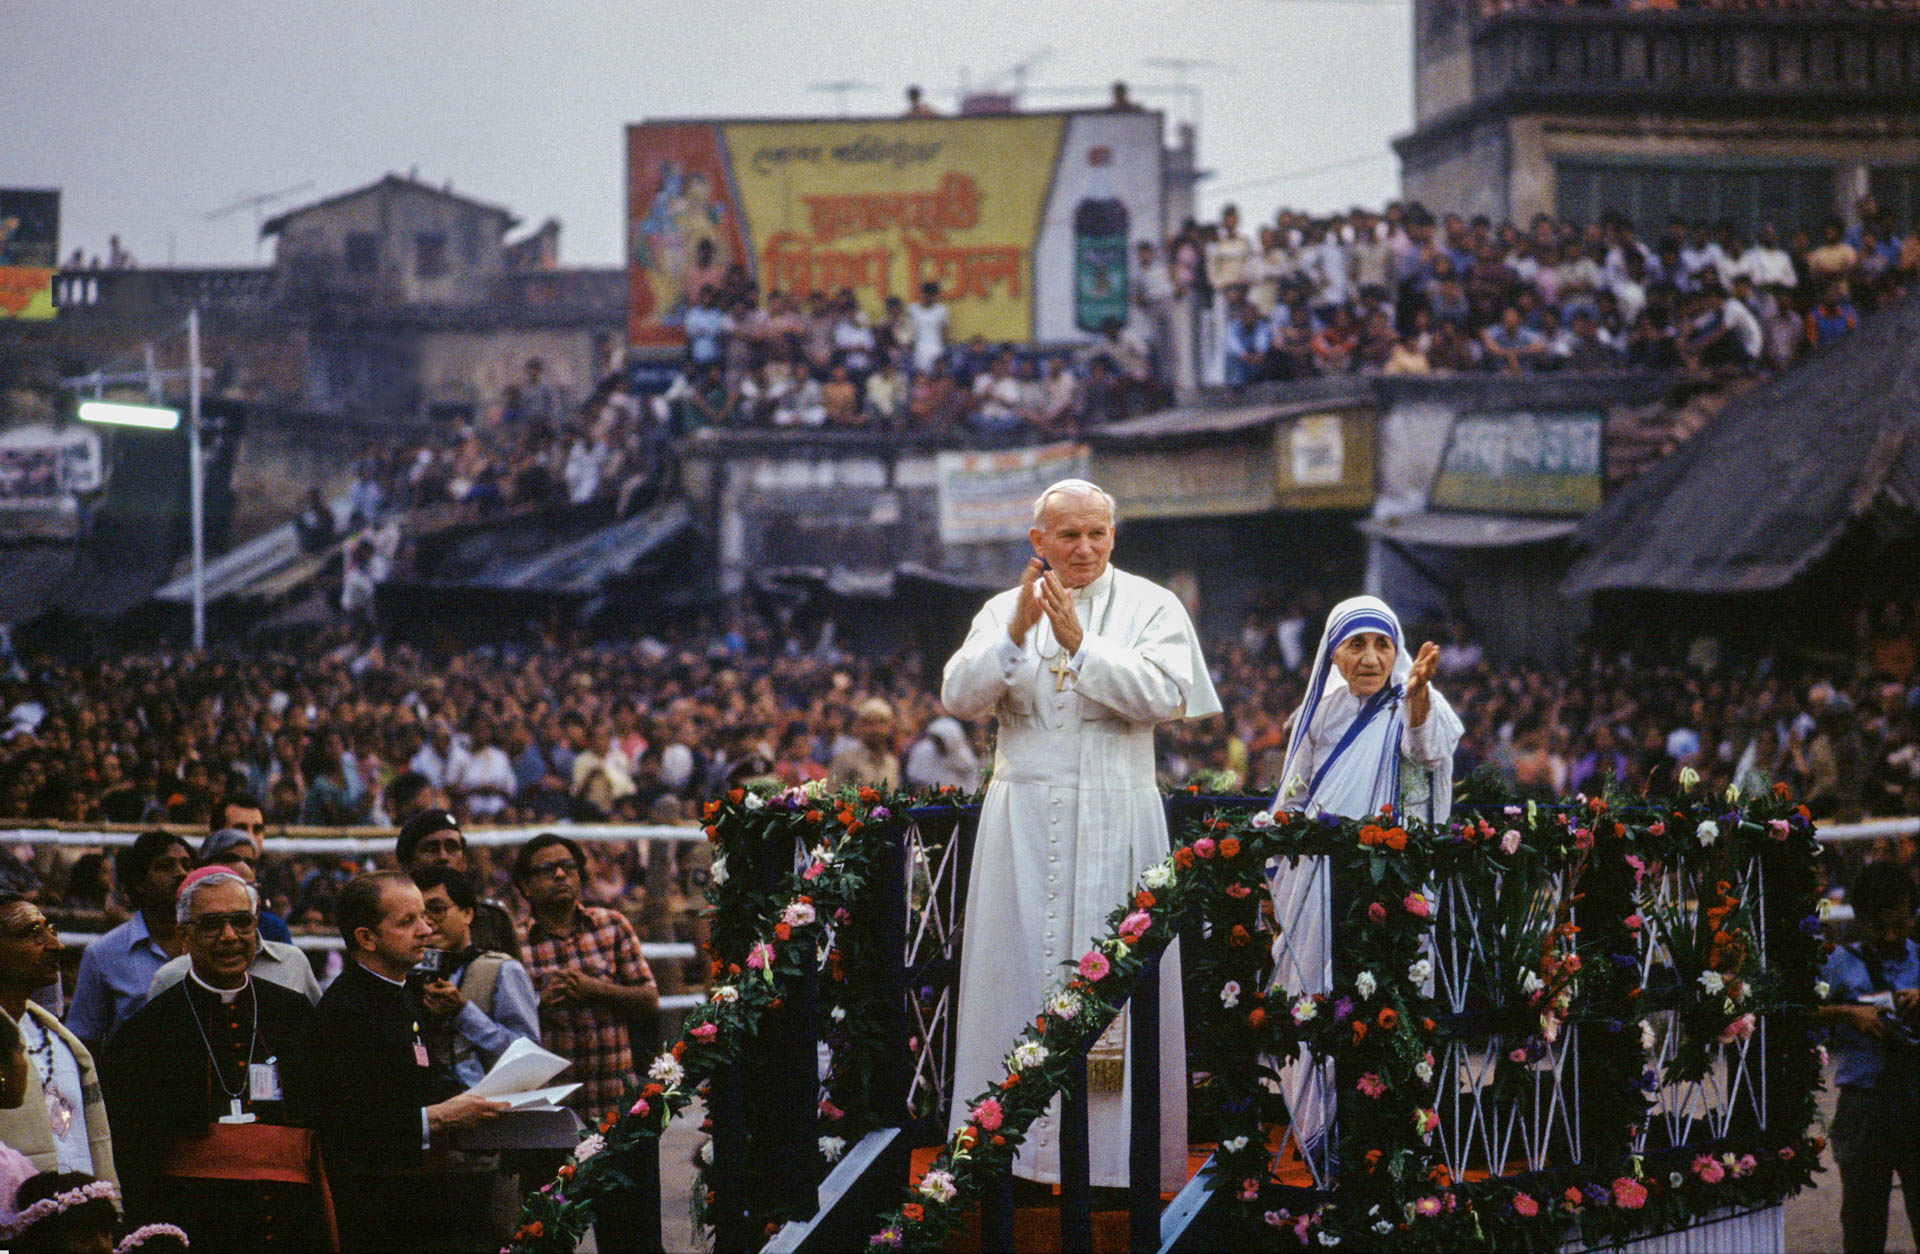  Calcutta, India - February 1986 During his visit, the Pope went to the house given by the Priest of the Goddess Kali to Mother Teresa to look after the dying homeless: "Oh most tender and compassionate God, bless all those who are dying, all those w